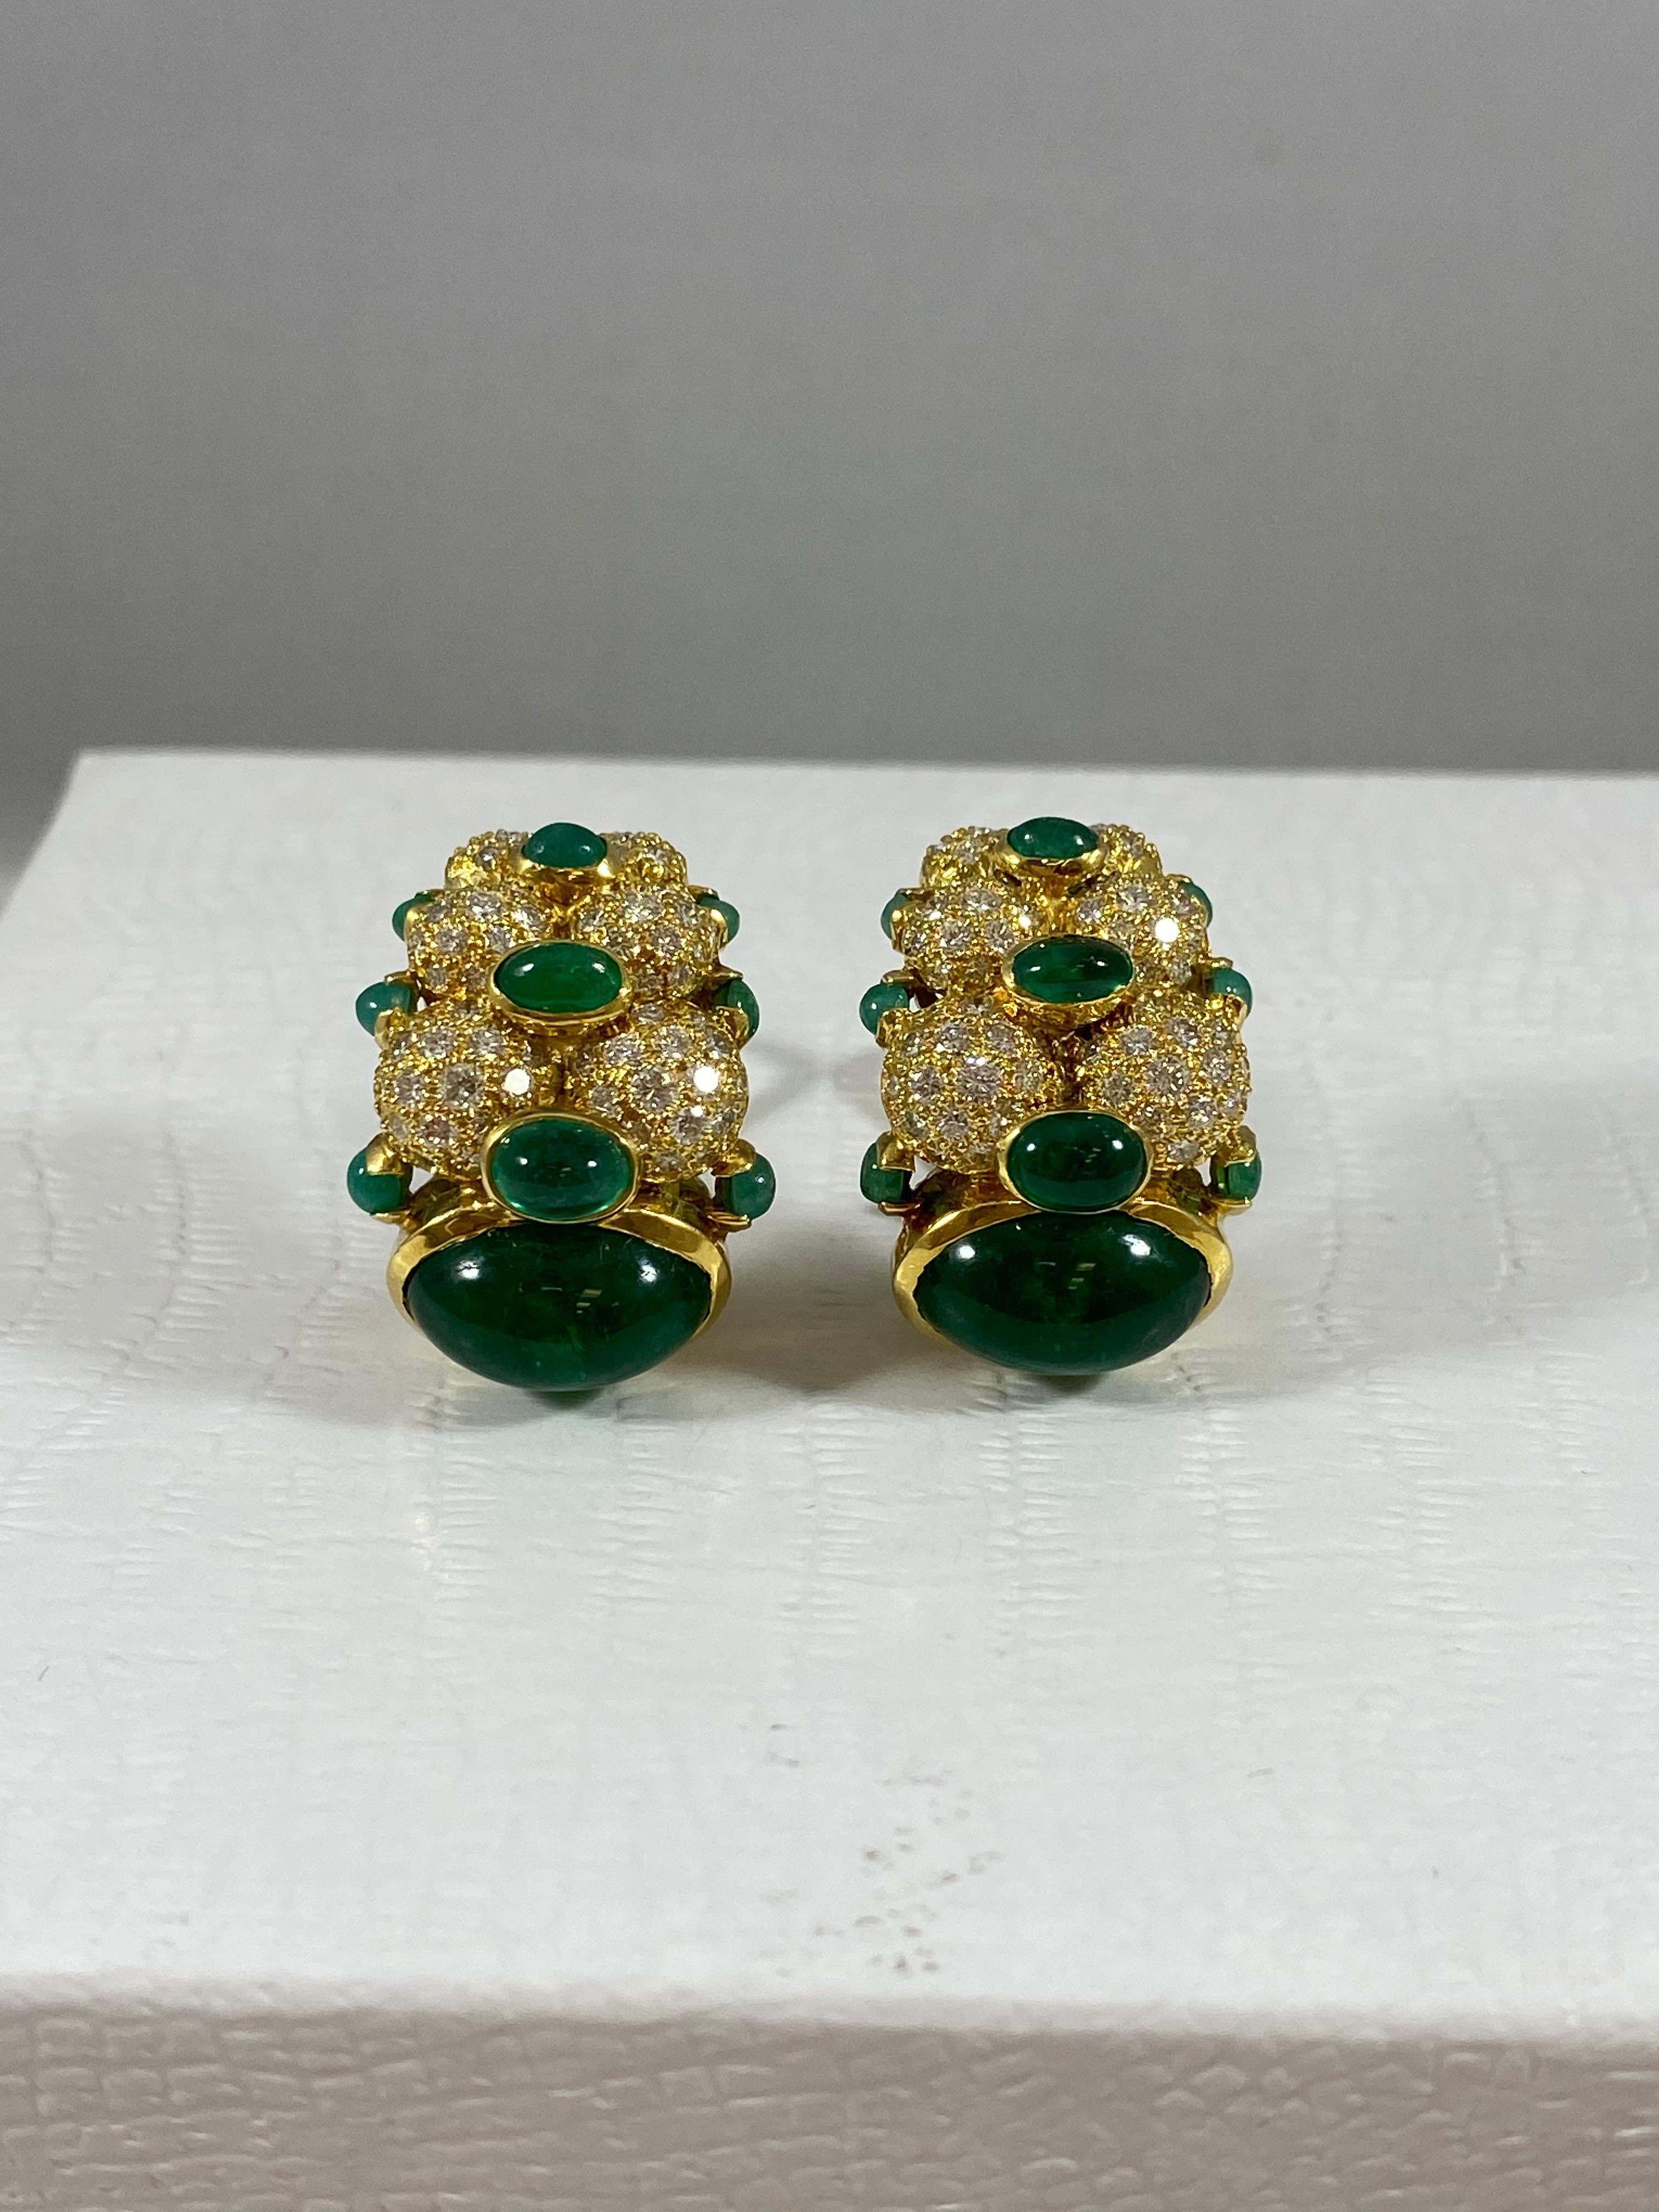 Hammerman Brothers Cabochon Emerald and Diamond Earrings In New Condition For Sale In New York, NY